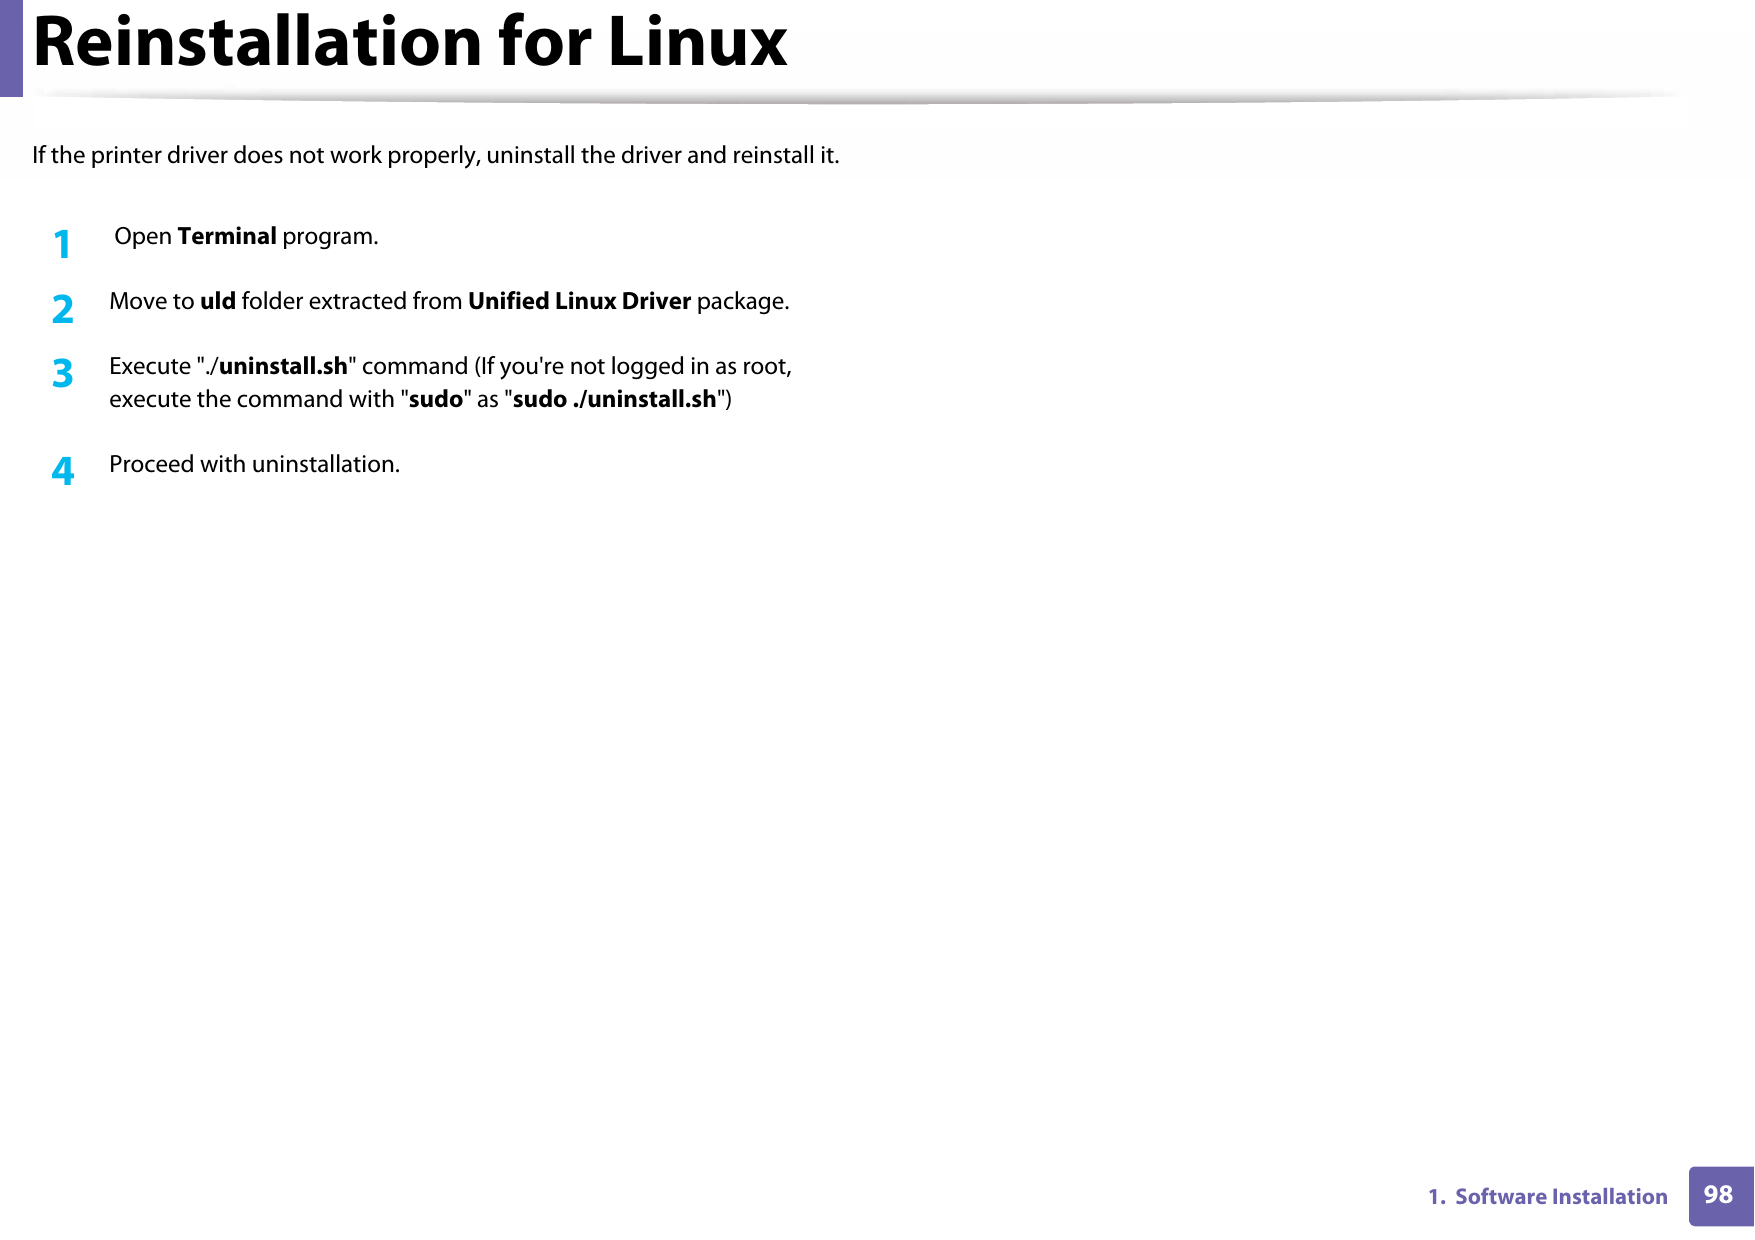 981.  Software InstallationReinstallation for LinuxIf the printer driver does not work properly, uninstall the driver and reinstall it.1 Open Terminal program.2  Move to uld folder extracted from Unified Linux Driver package.3  Execute &quot;./uninstall.sh&quot; command (If you&apos;re not logged in as root, execute the command with &quot;sudo&quot; as &quot;sudo ./uninstall.sh&quot;)4  Proceed with uninstallation.